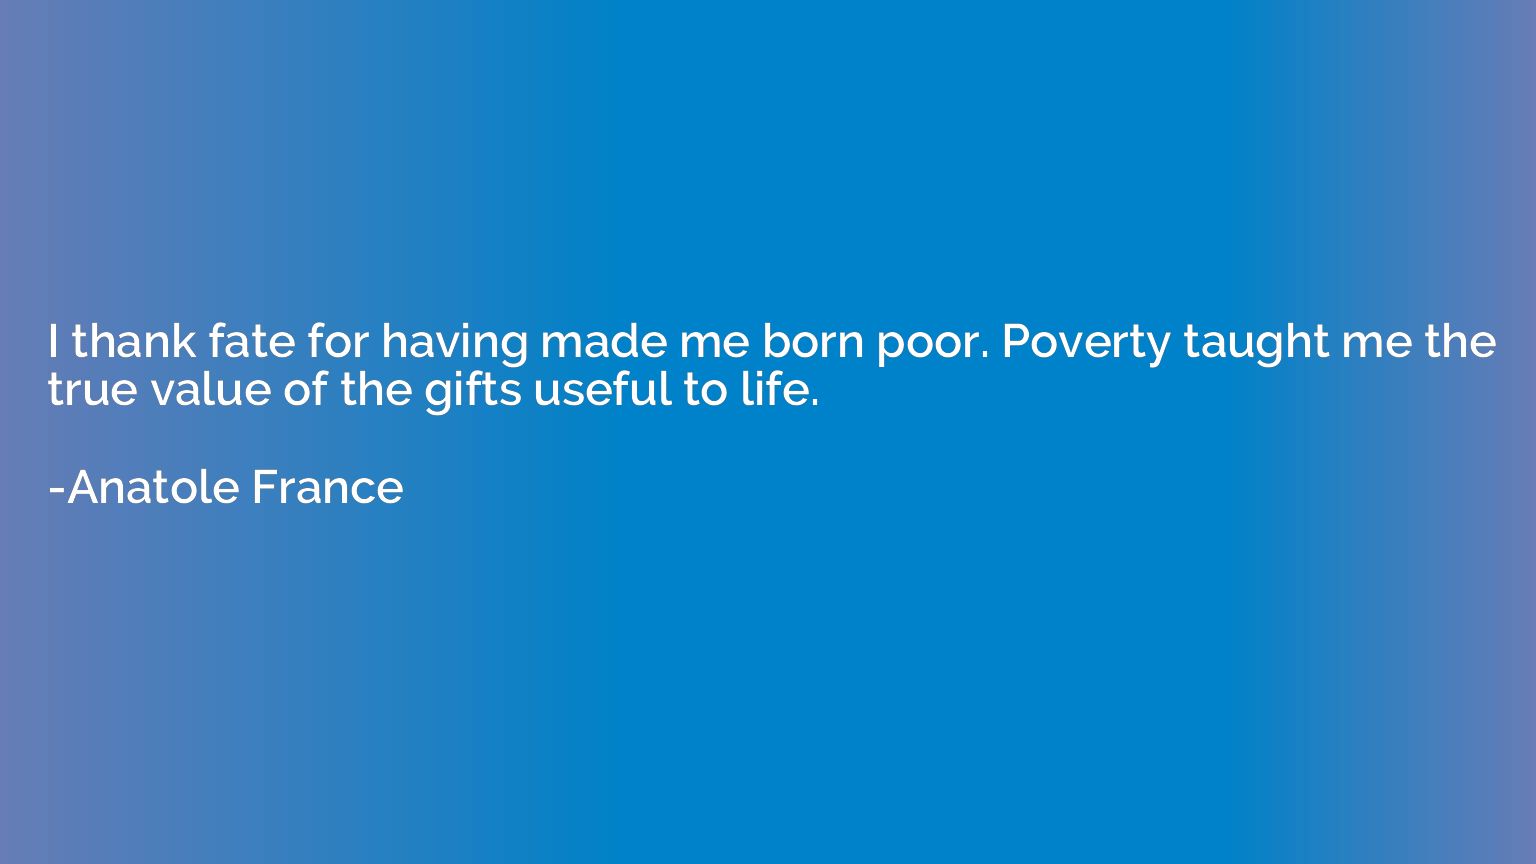 I thank fate for having made me born poor. Poverty taught me